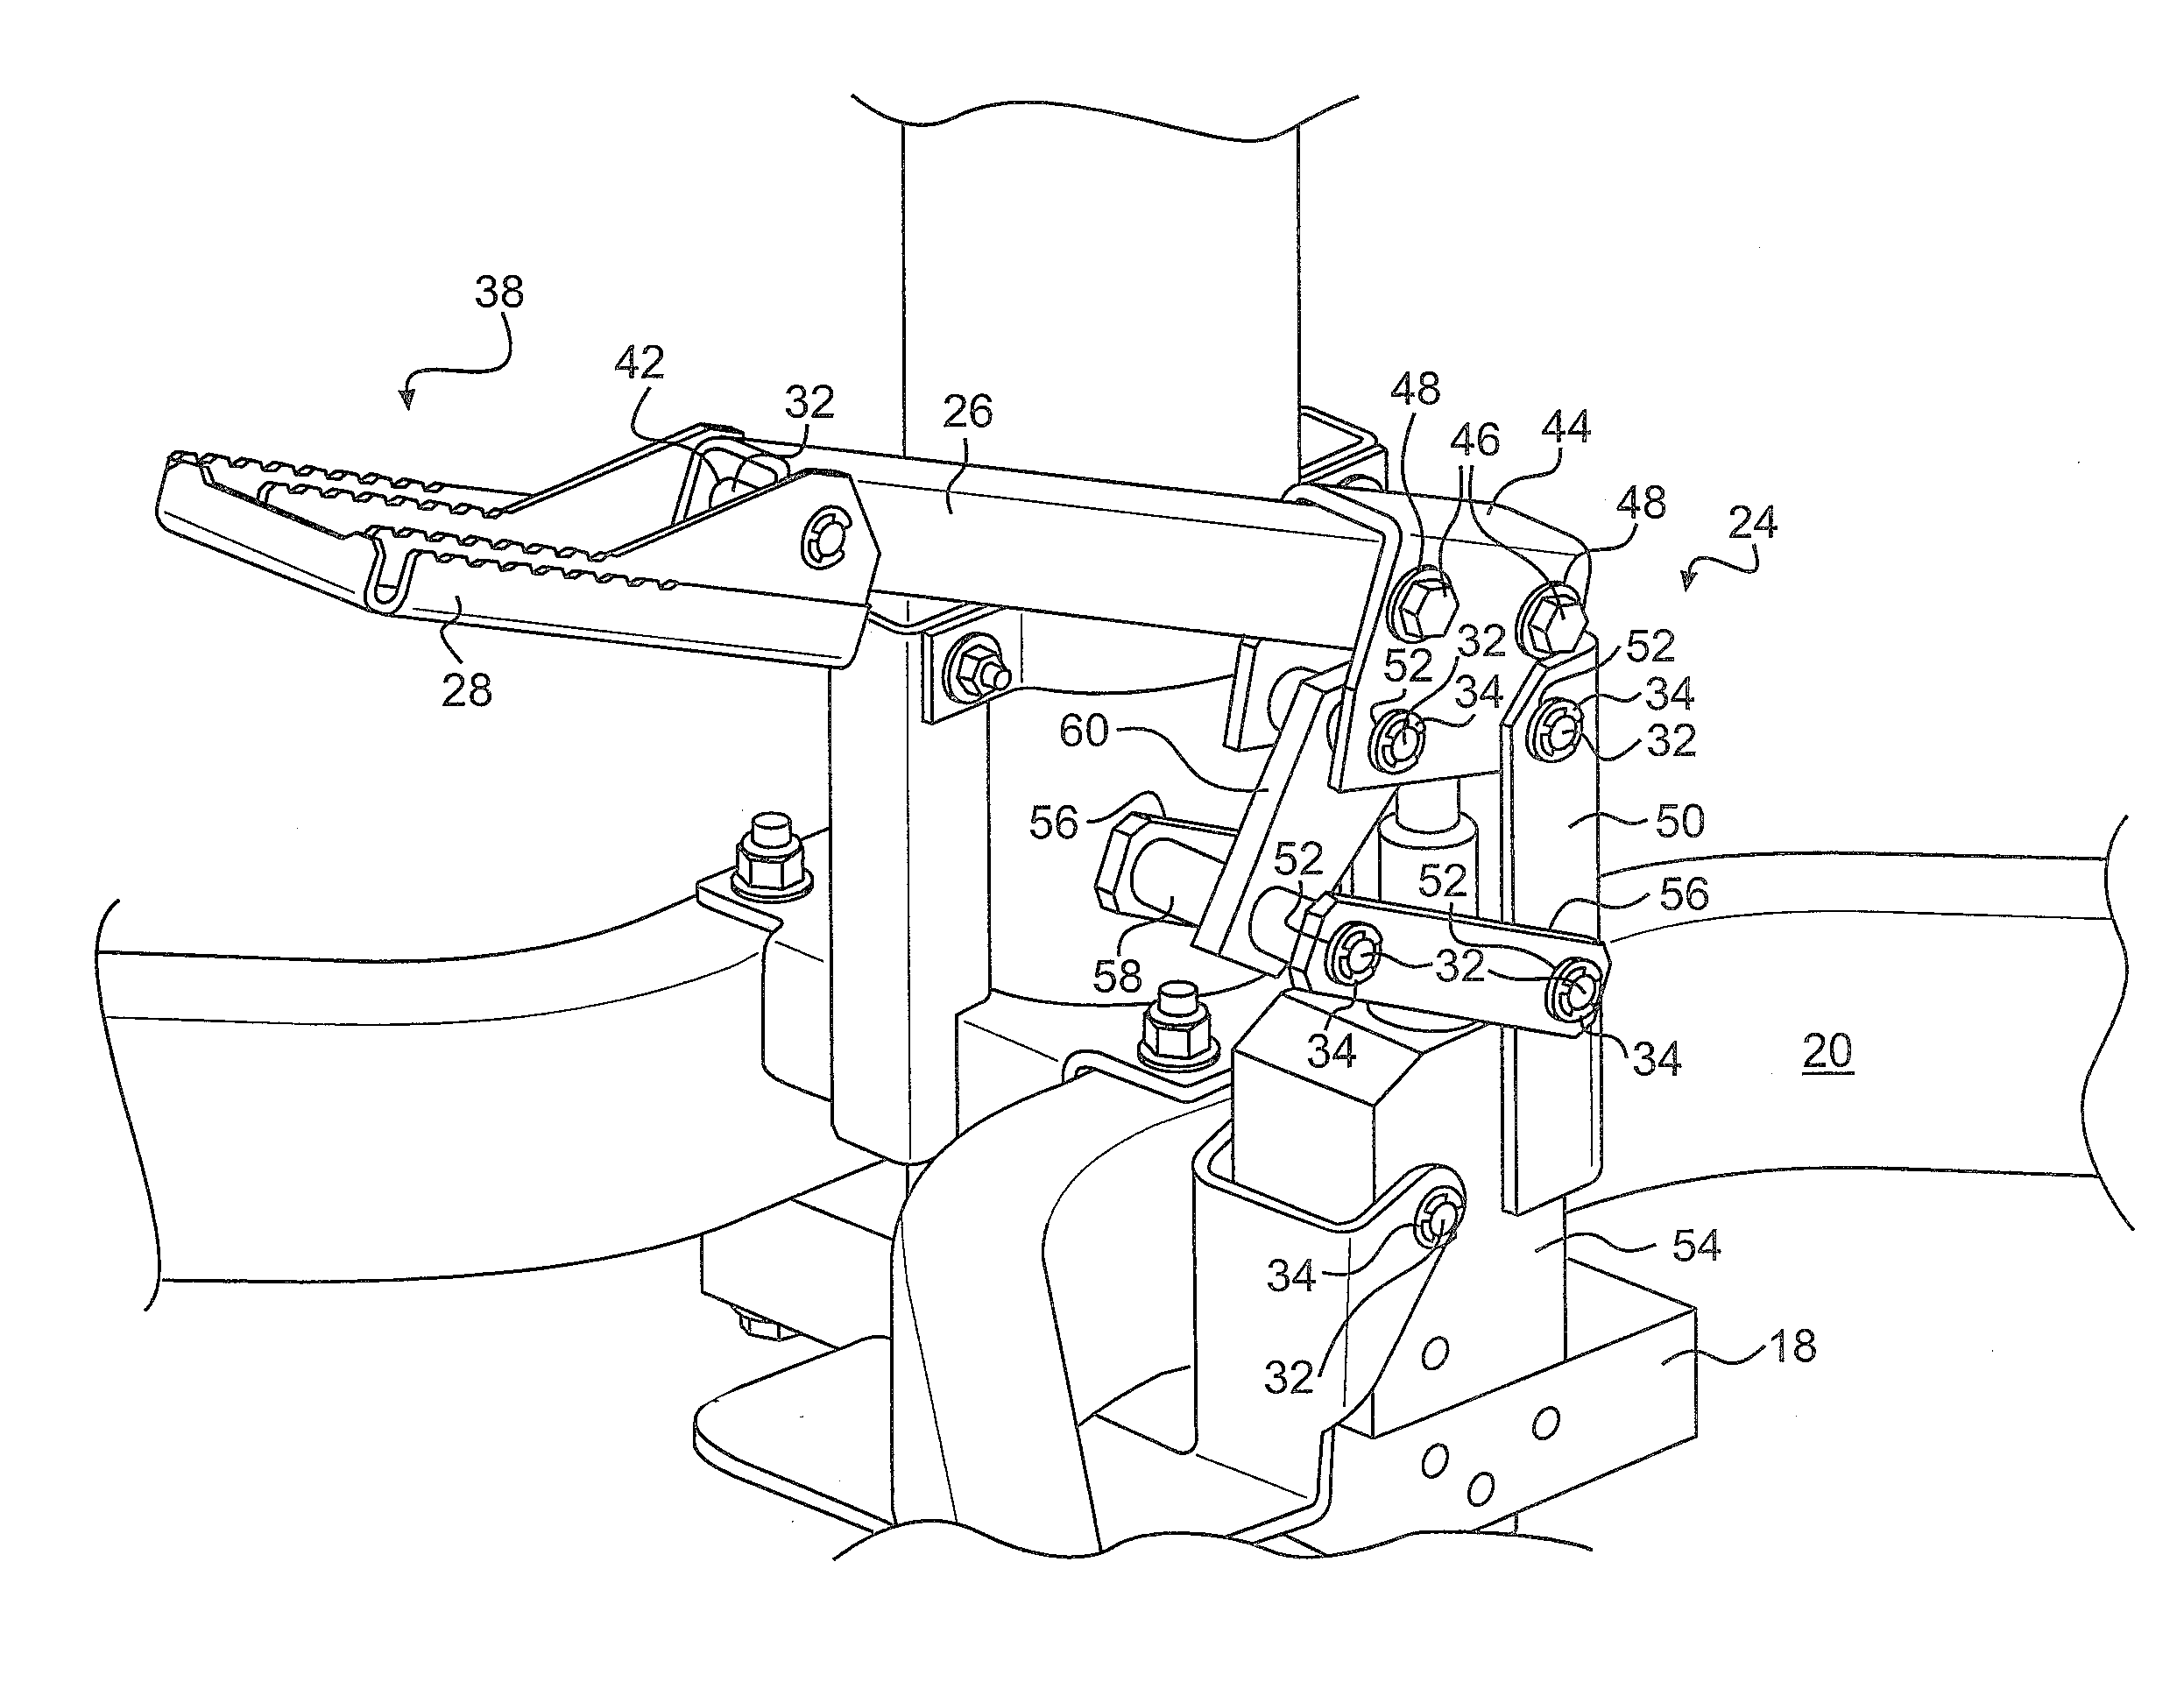 Adjustable foot pedal, linkage, and method for actuating a hydraulic cylinder